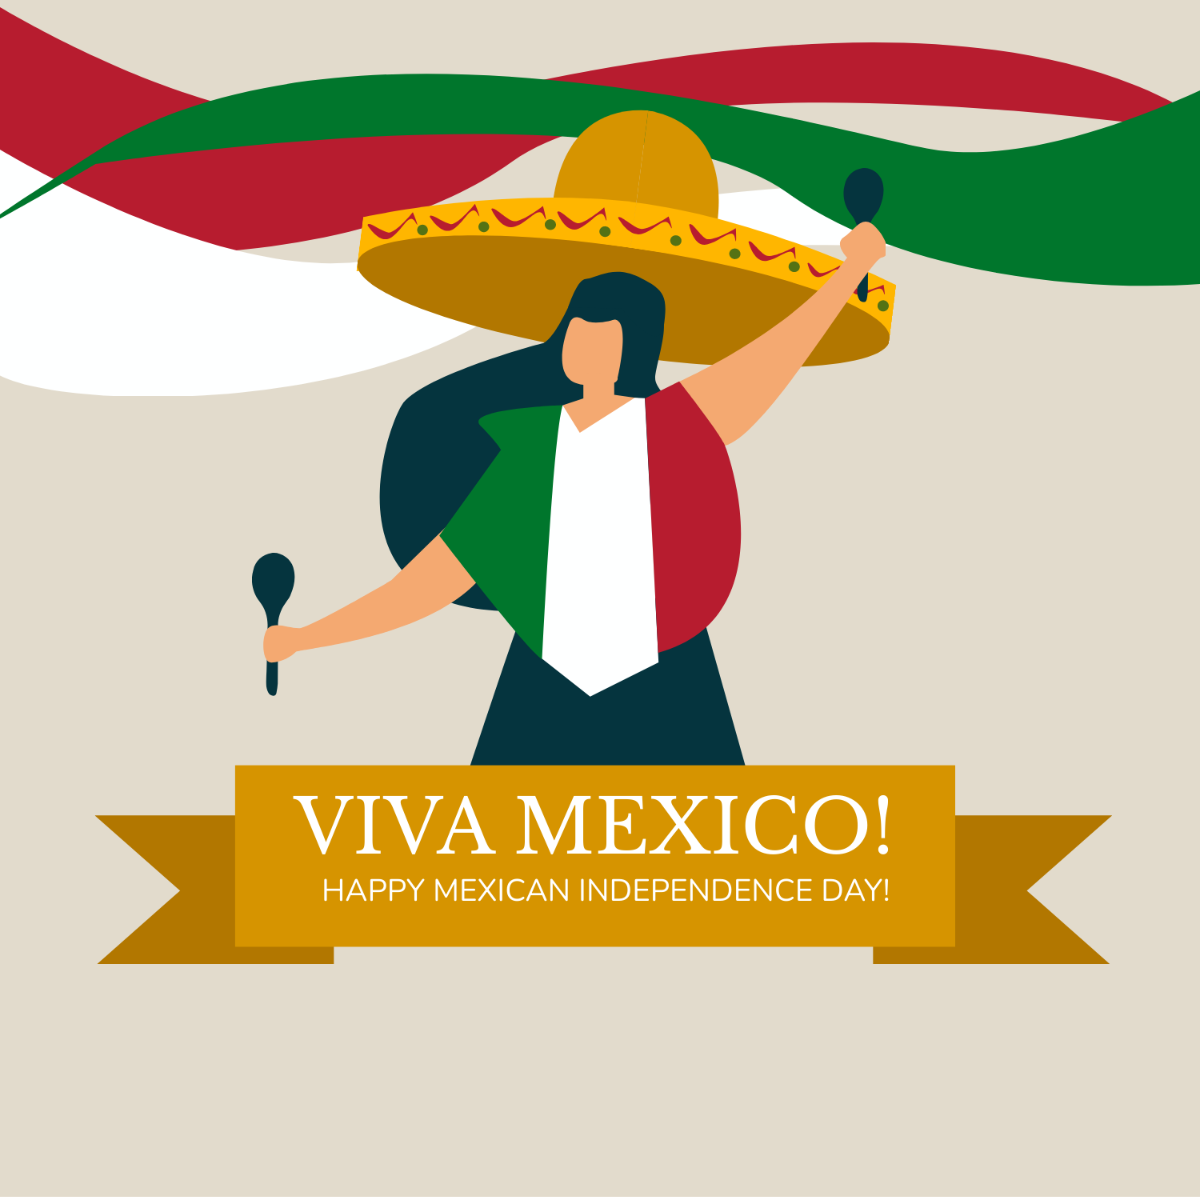 Happy Mexican Independence Day Illustration Template